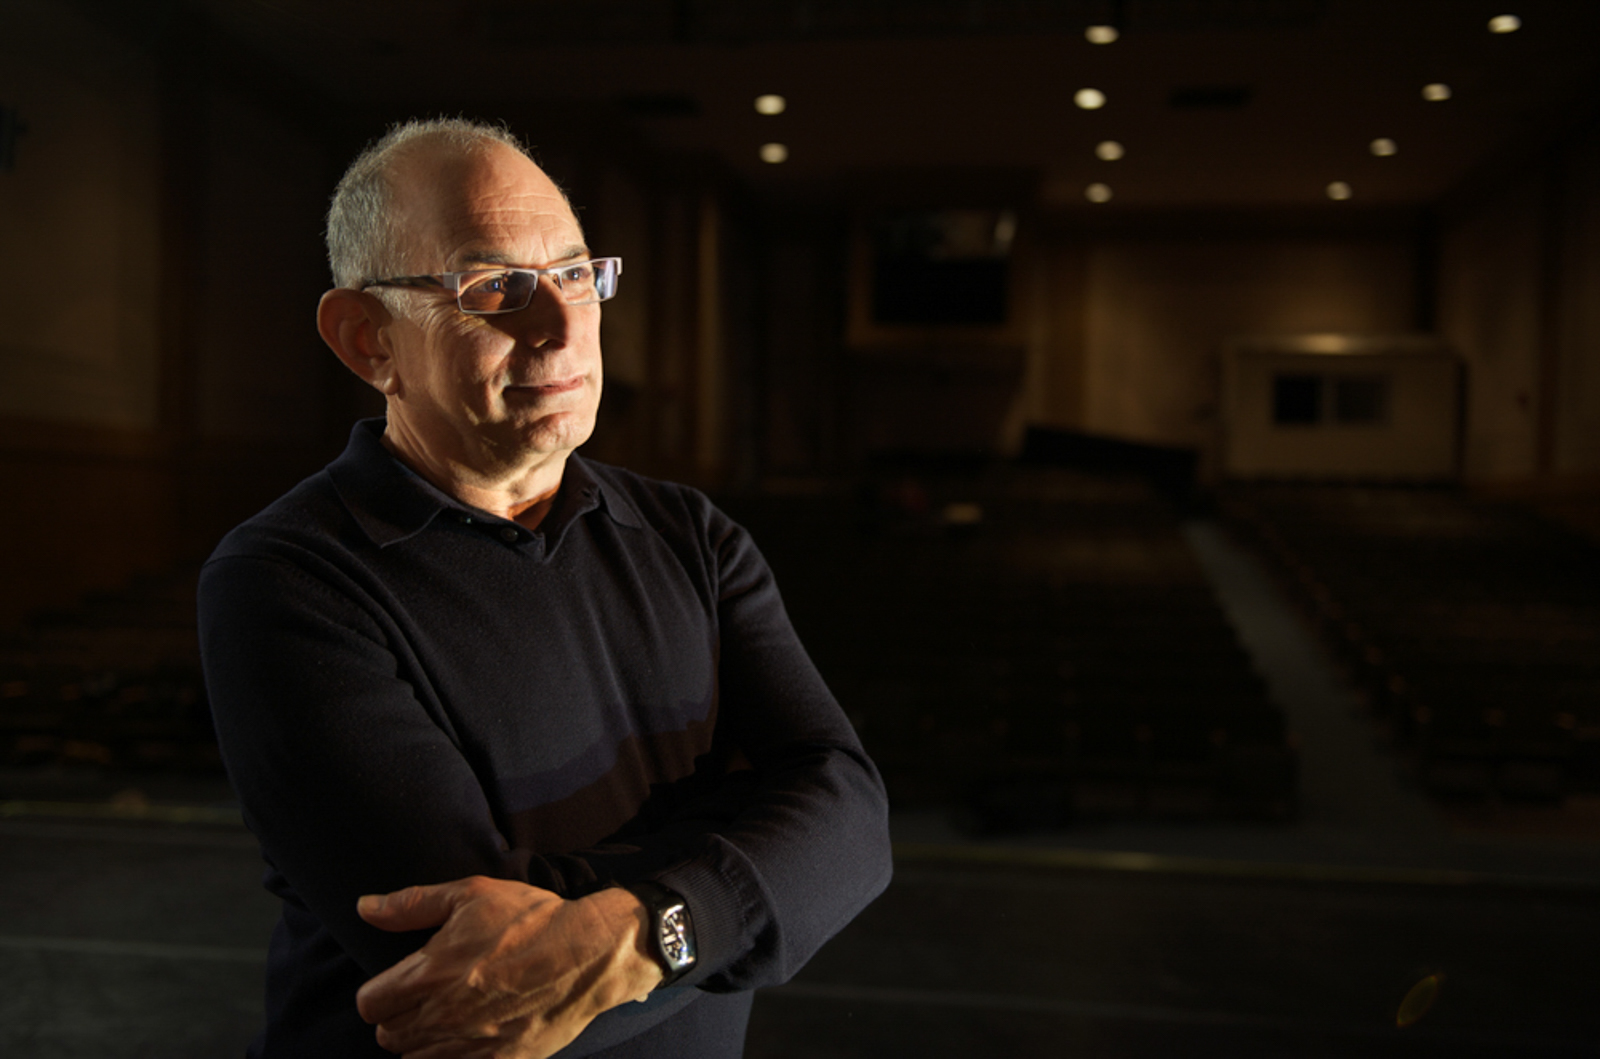 Environmental portrait of man with arms crossed in auditorium